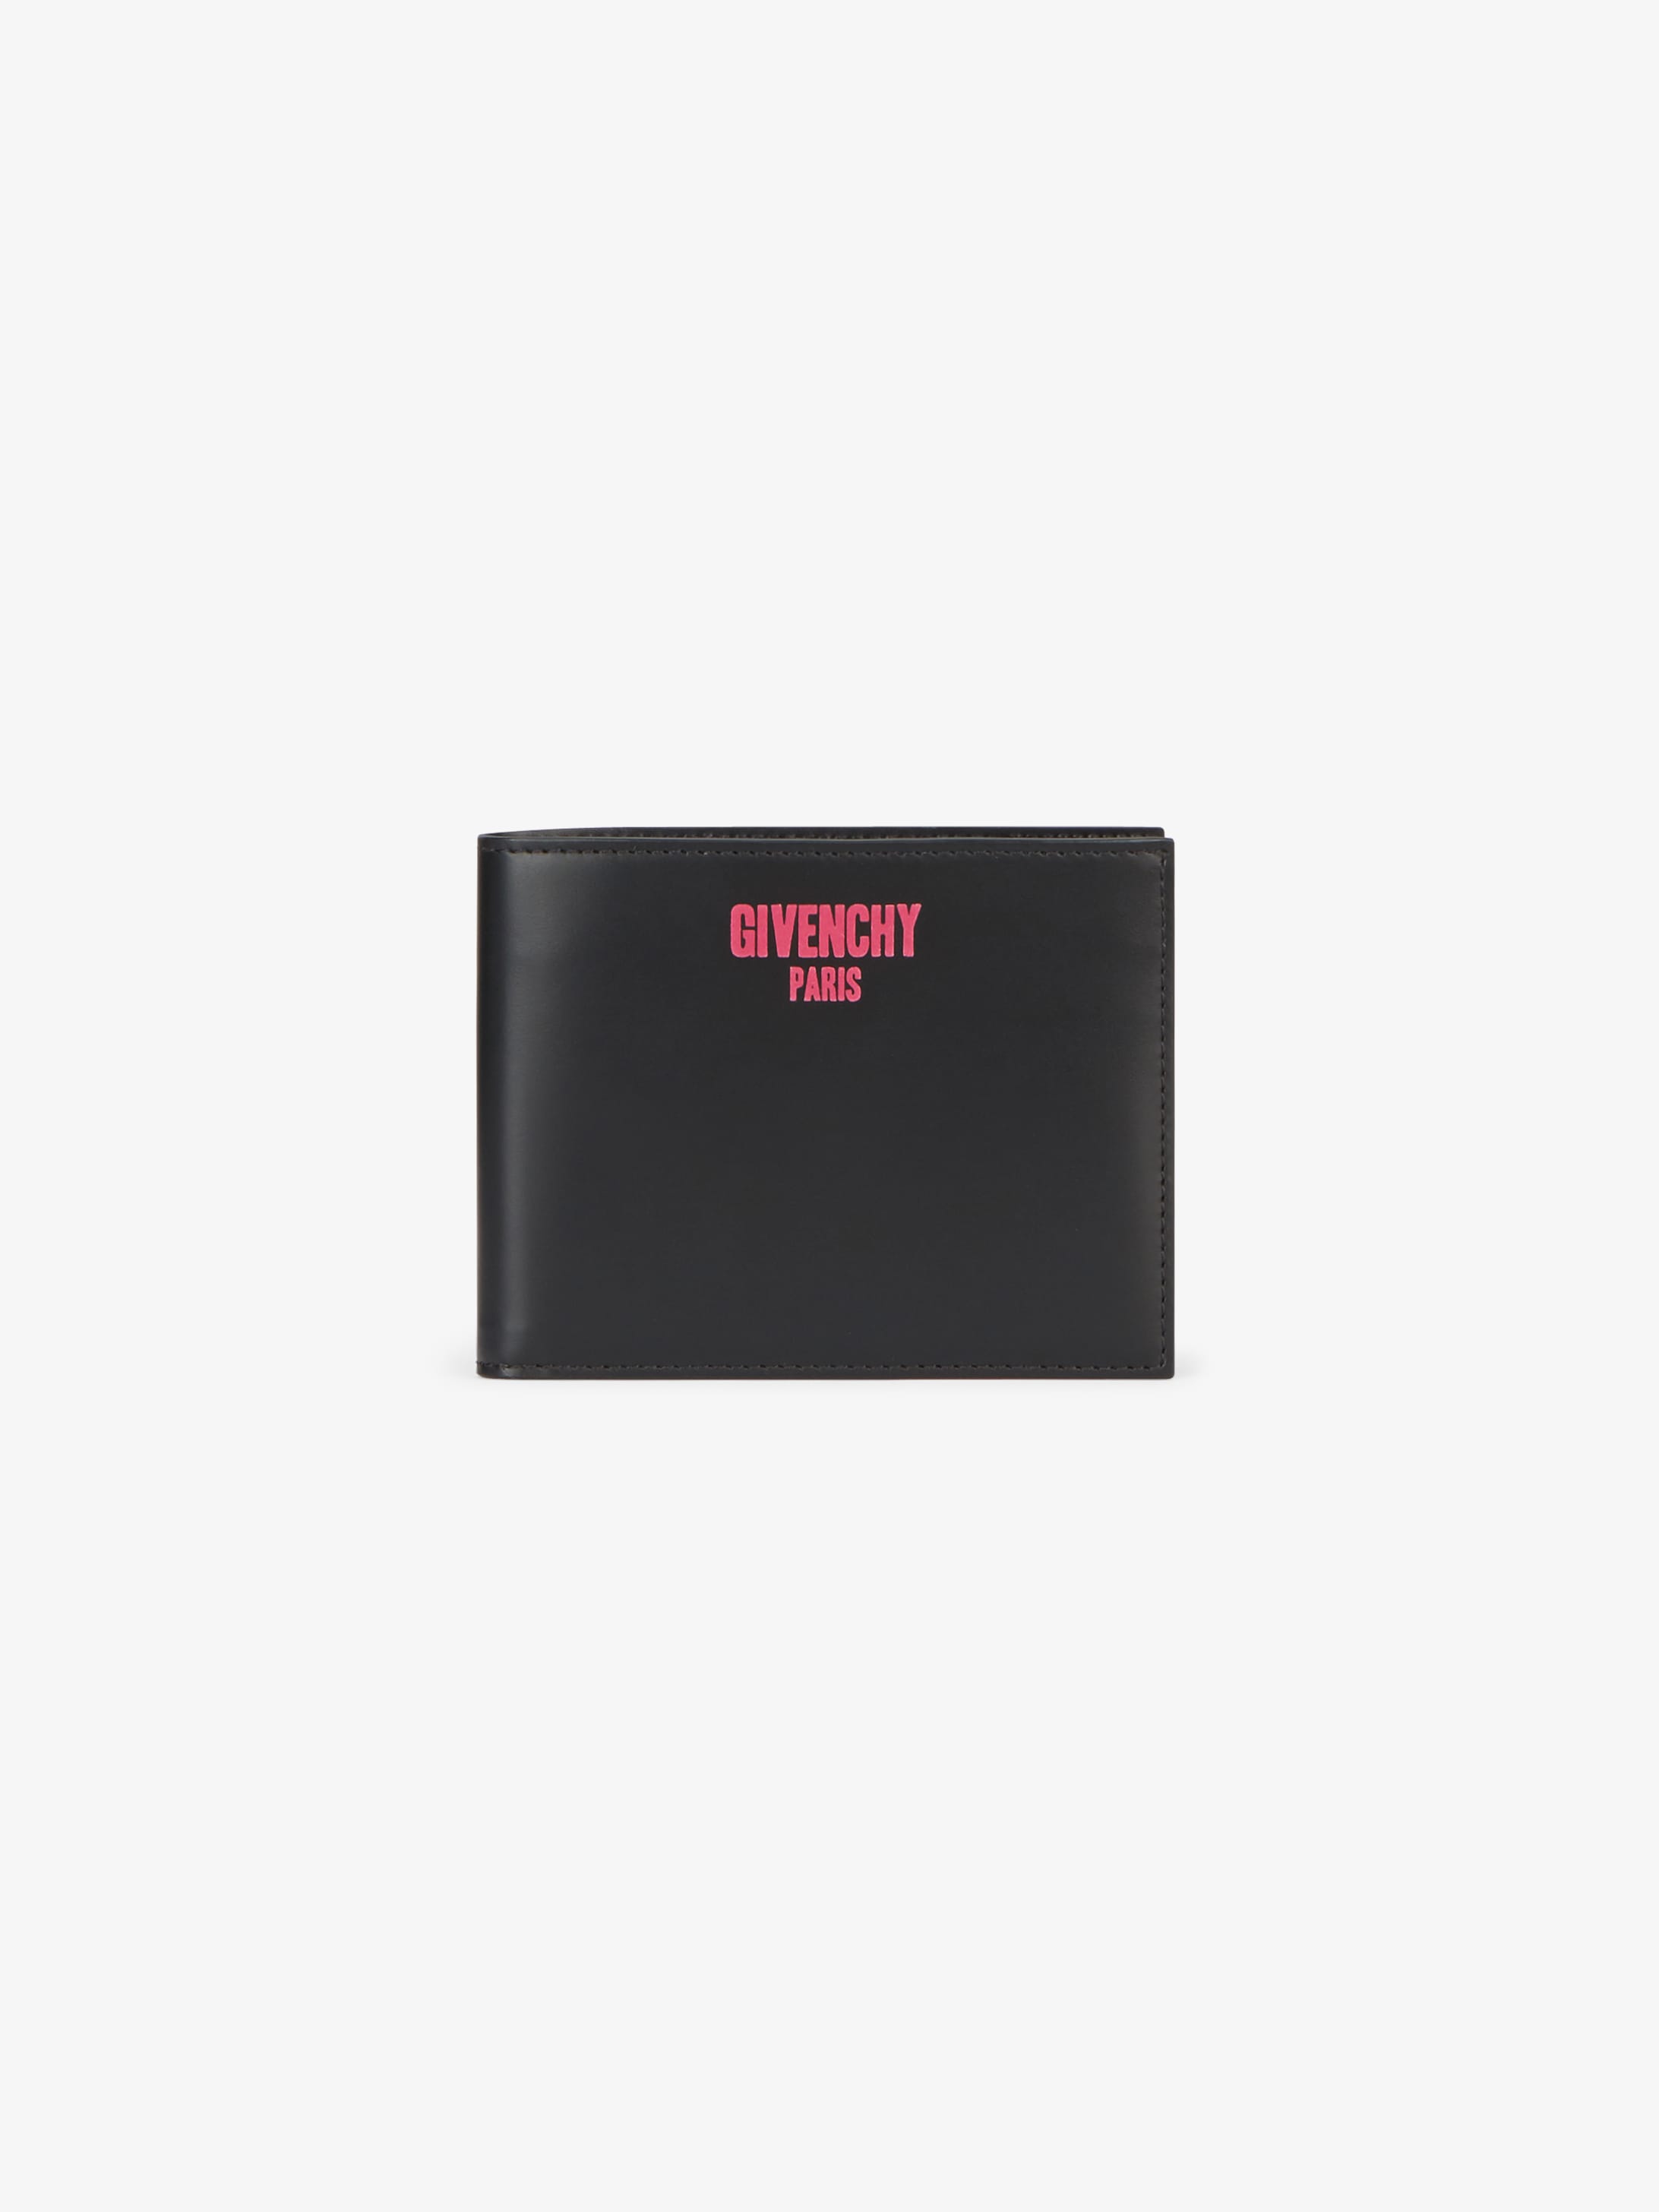 GIVENCHY PARIS leather printed wallet 